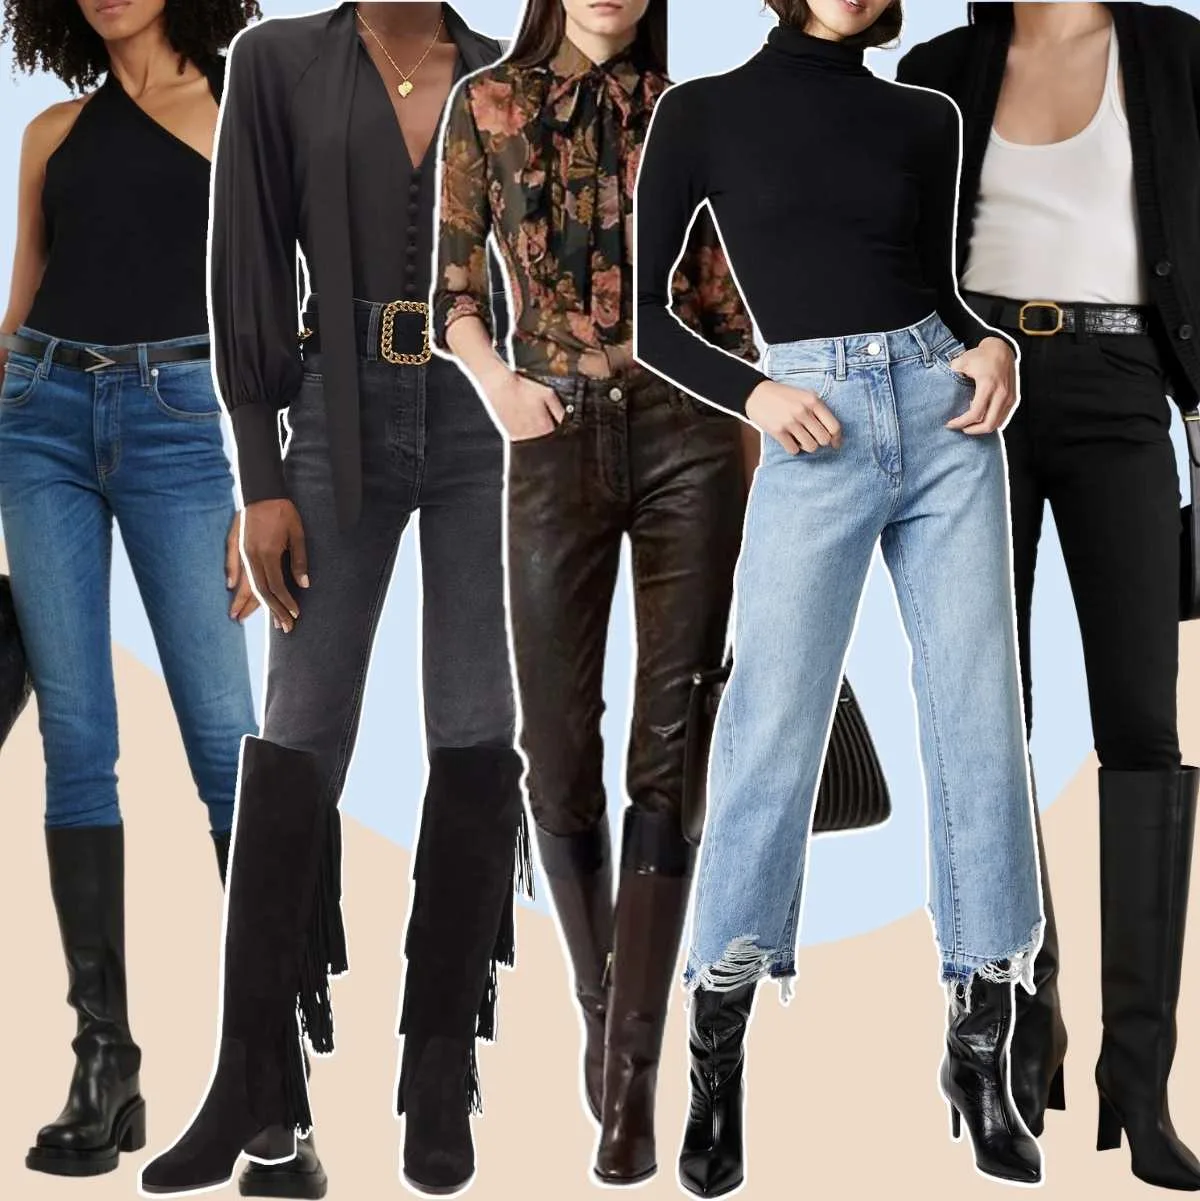 Collage of 5 women different knee boots with jeans.